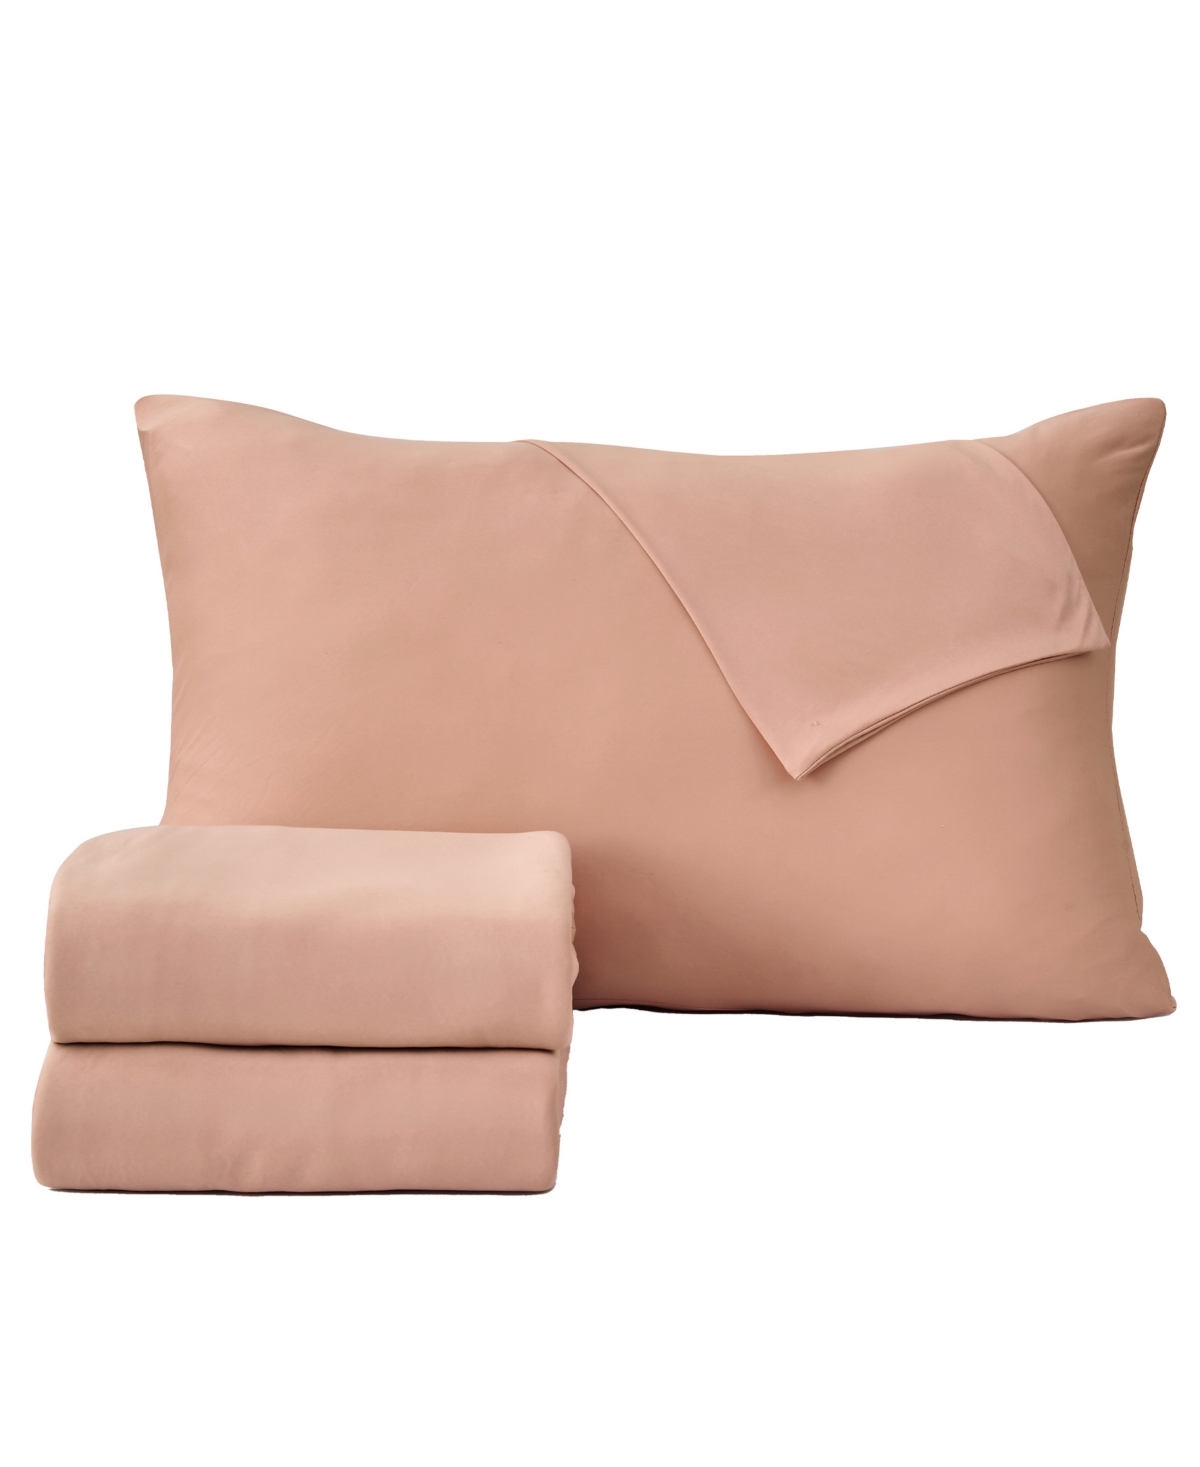 Premium Comforts Performance Cooling Super Soft Polyester 4 Piece Sheet Set, Full In Dusty Rose